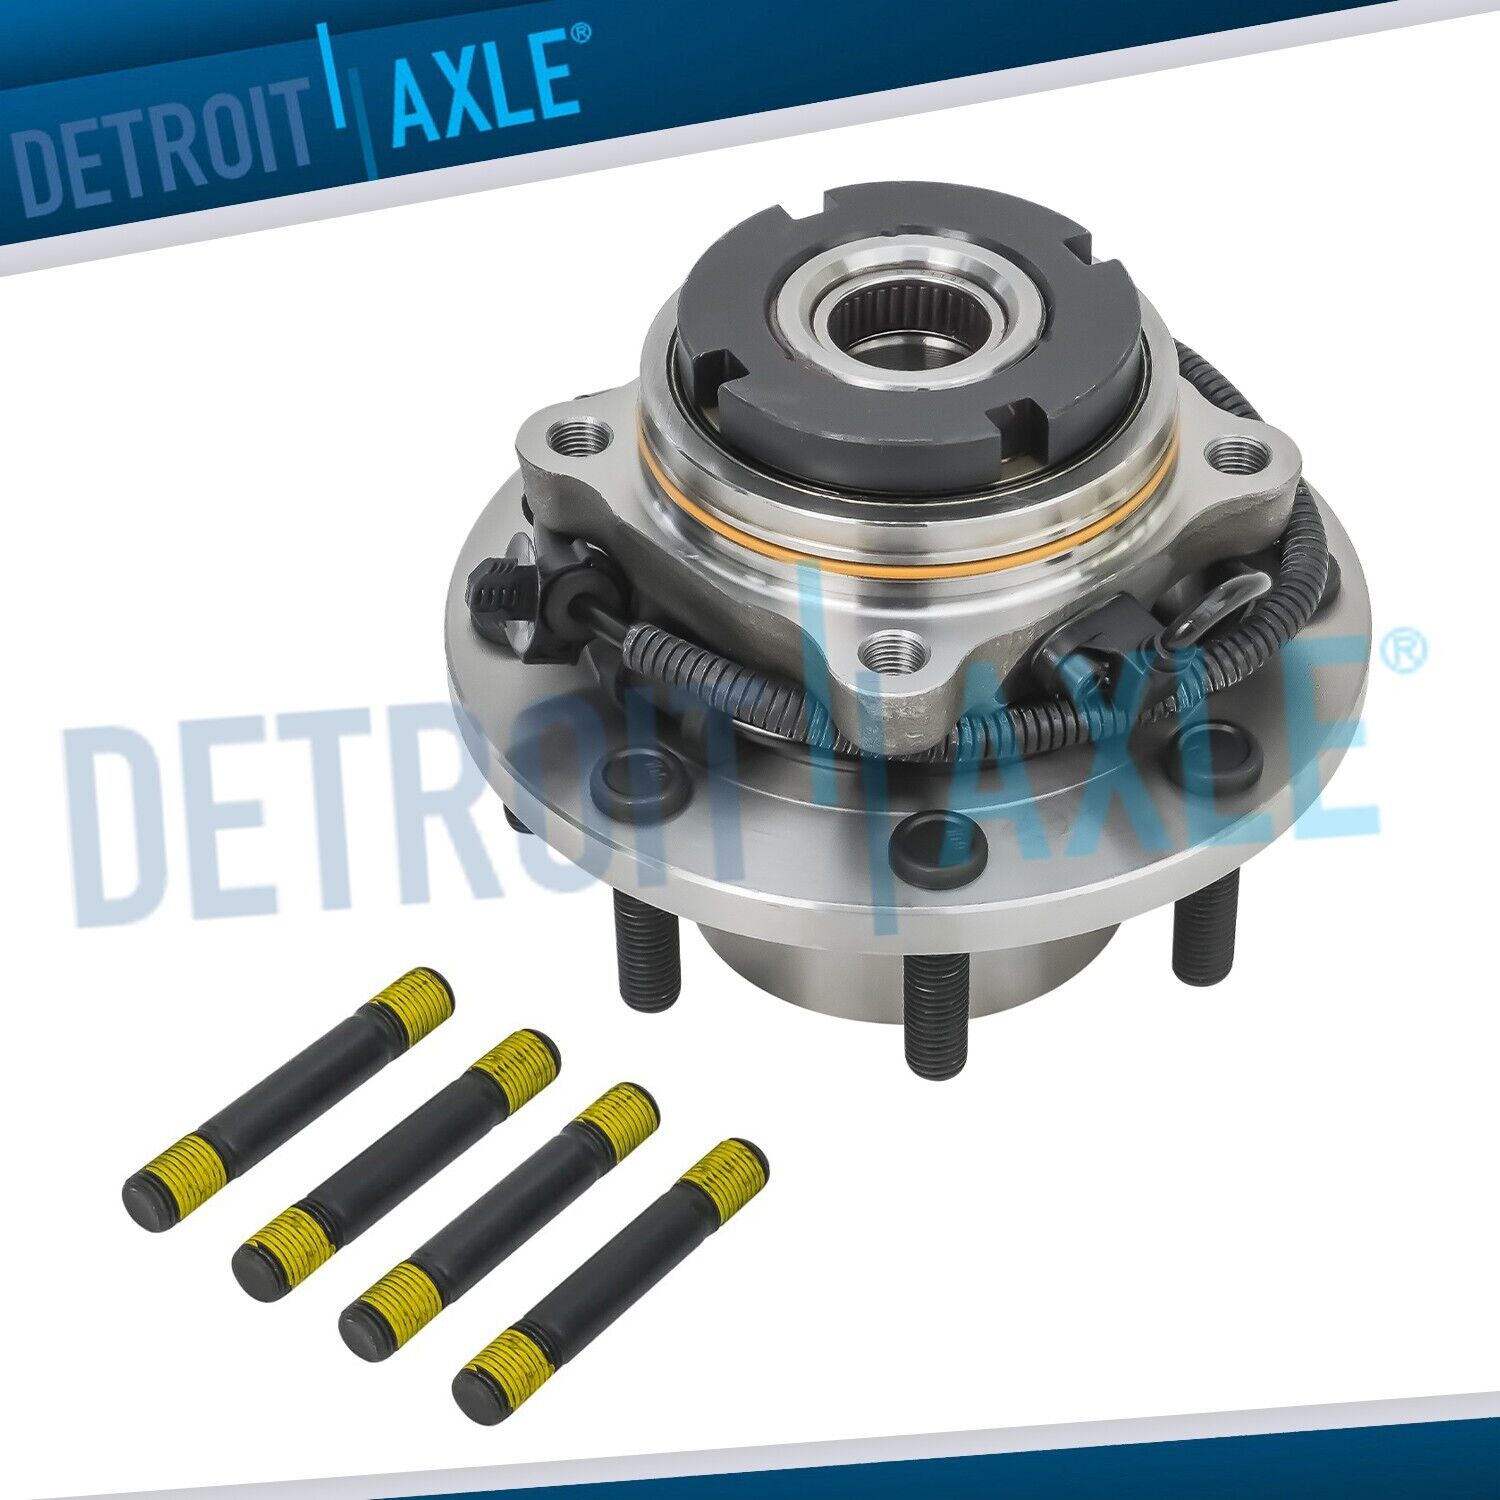 4WD Front Wheel Bearing Hub for 1999-2004 Ford F-250 F-350 F-450 F-550 SD DRW